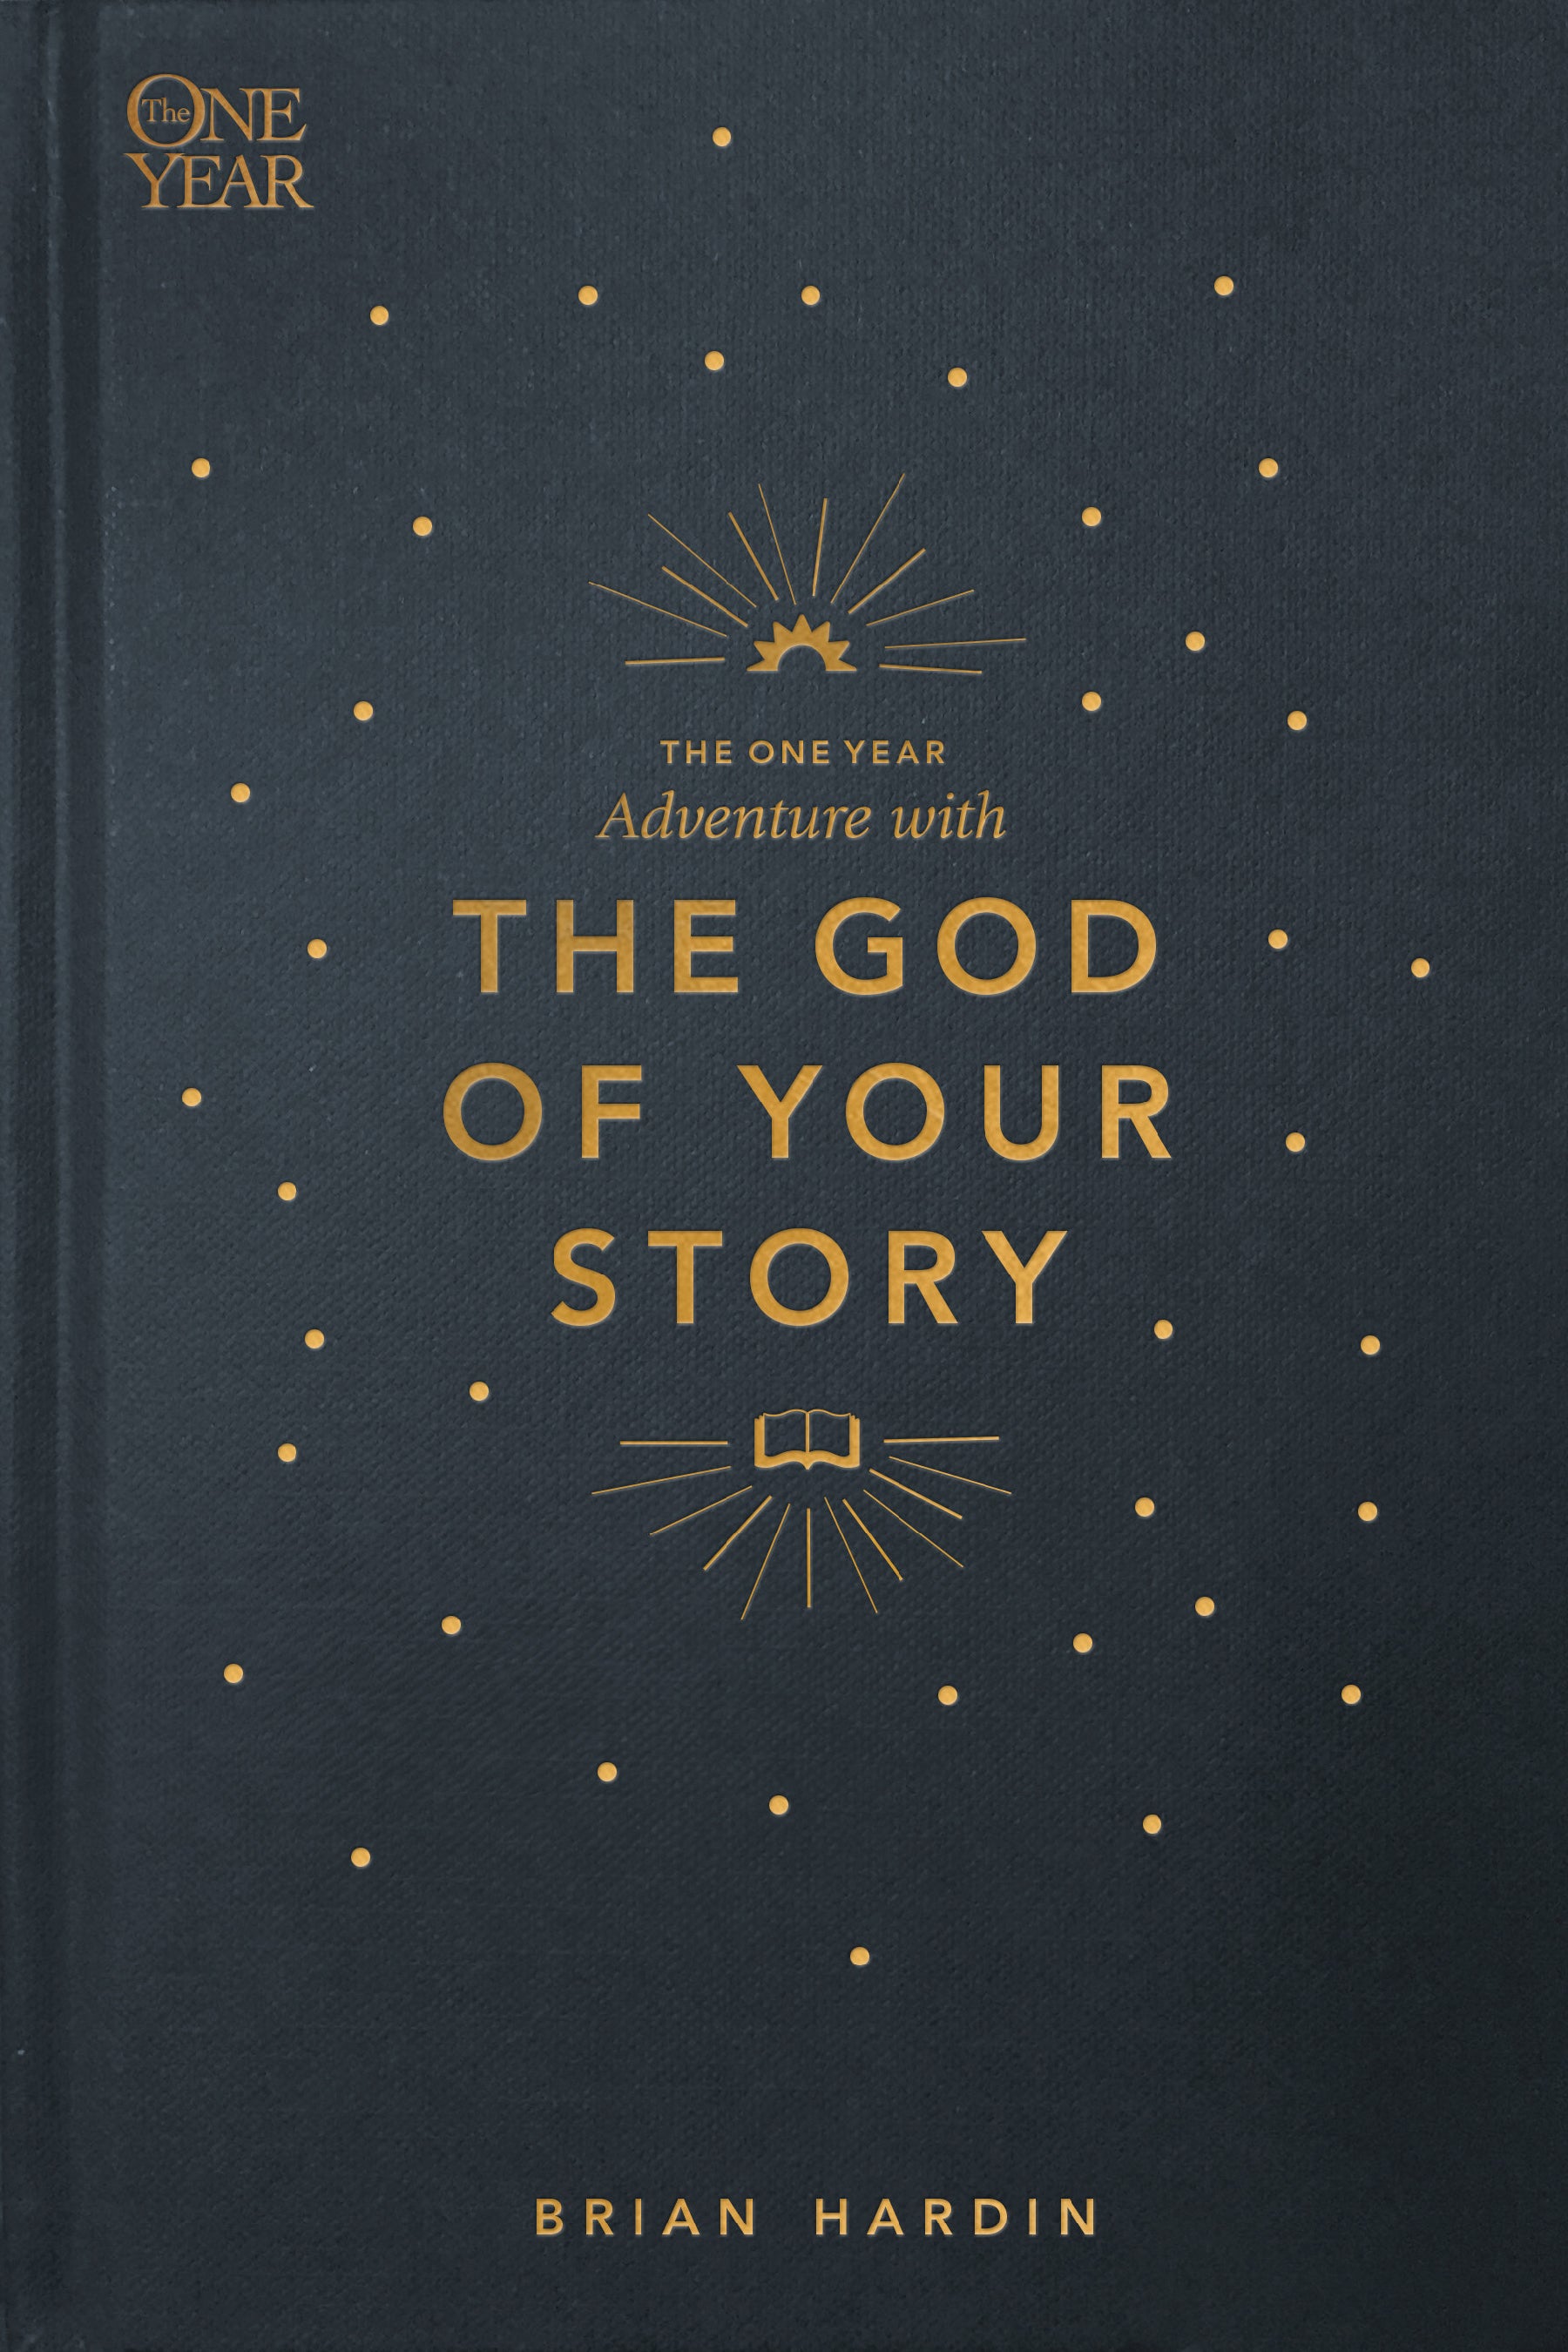 Image of One Year Adventure with the God of Your Story other